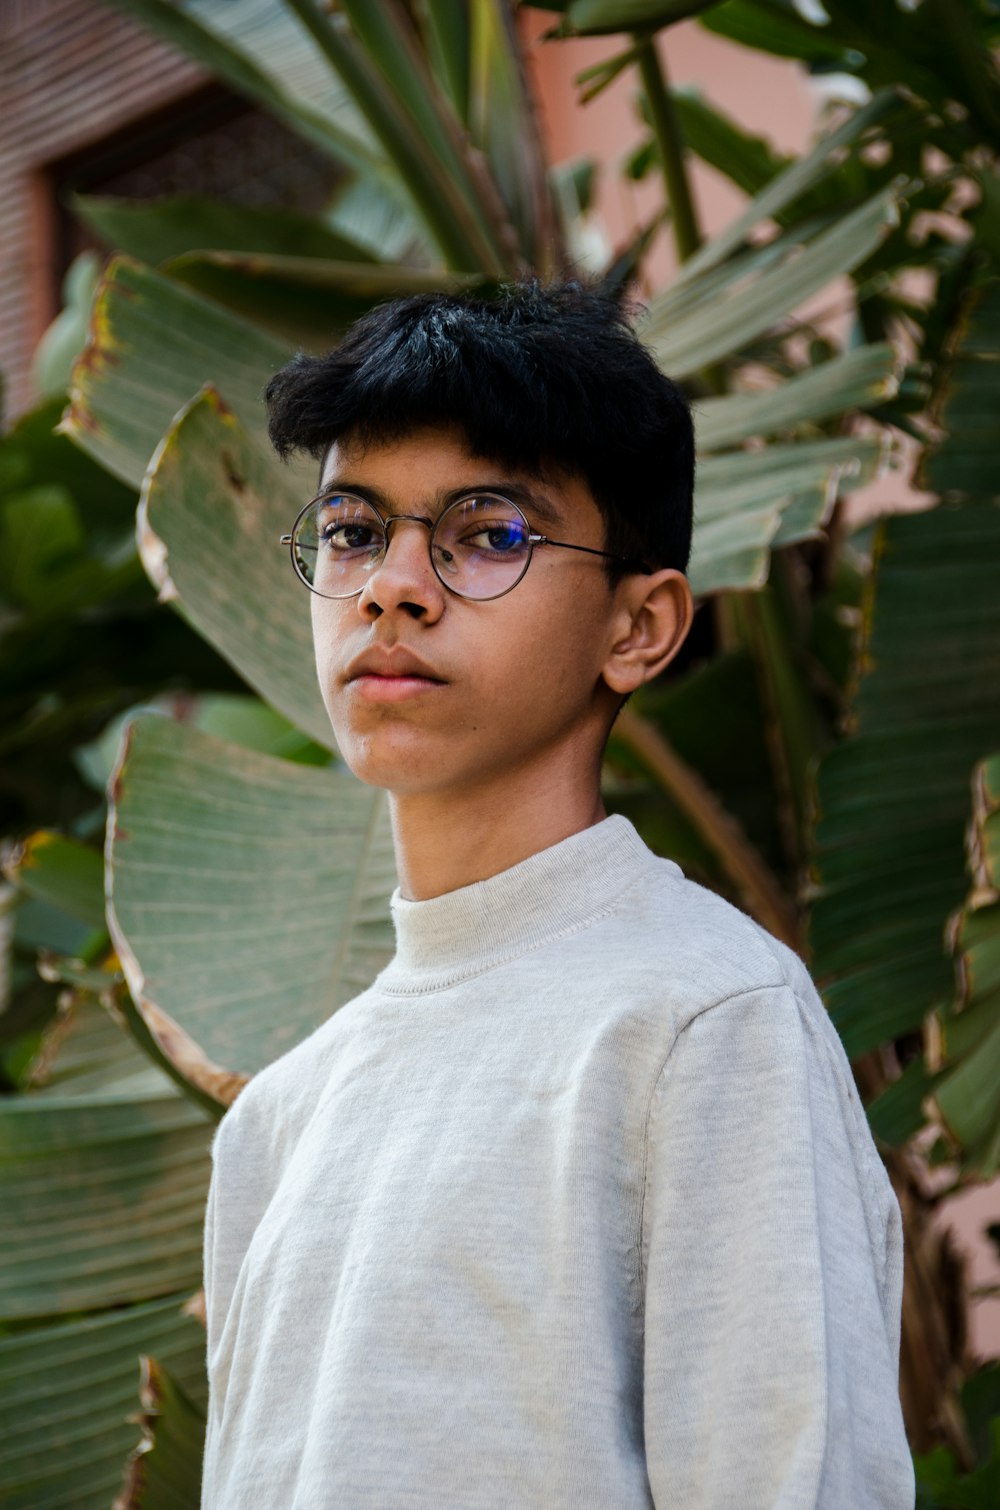 a young boy wearing glasses standing in front of a plant